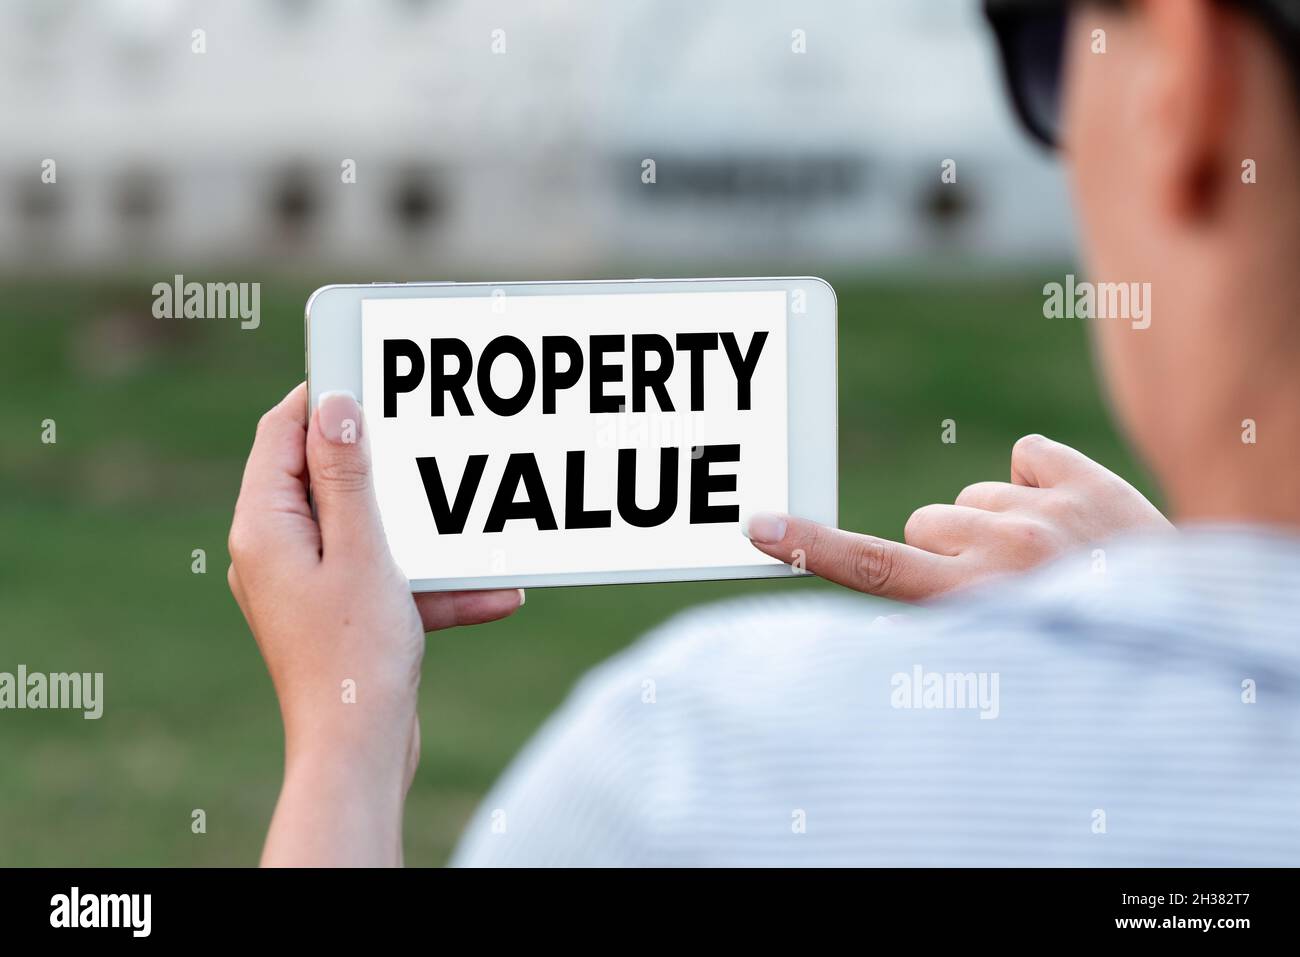 Text showing inspiration Property Value. Business idea Worth of a land Real estate appraisal Fair market price Voice And Video Calling Capabilities Stock Photo